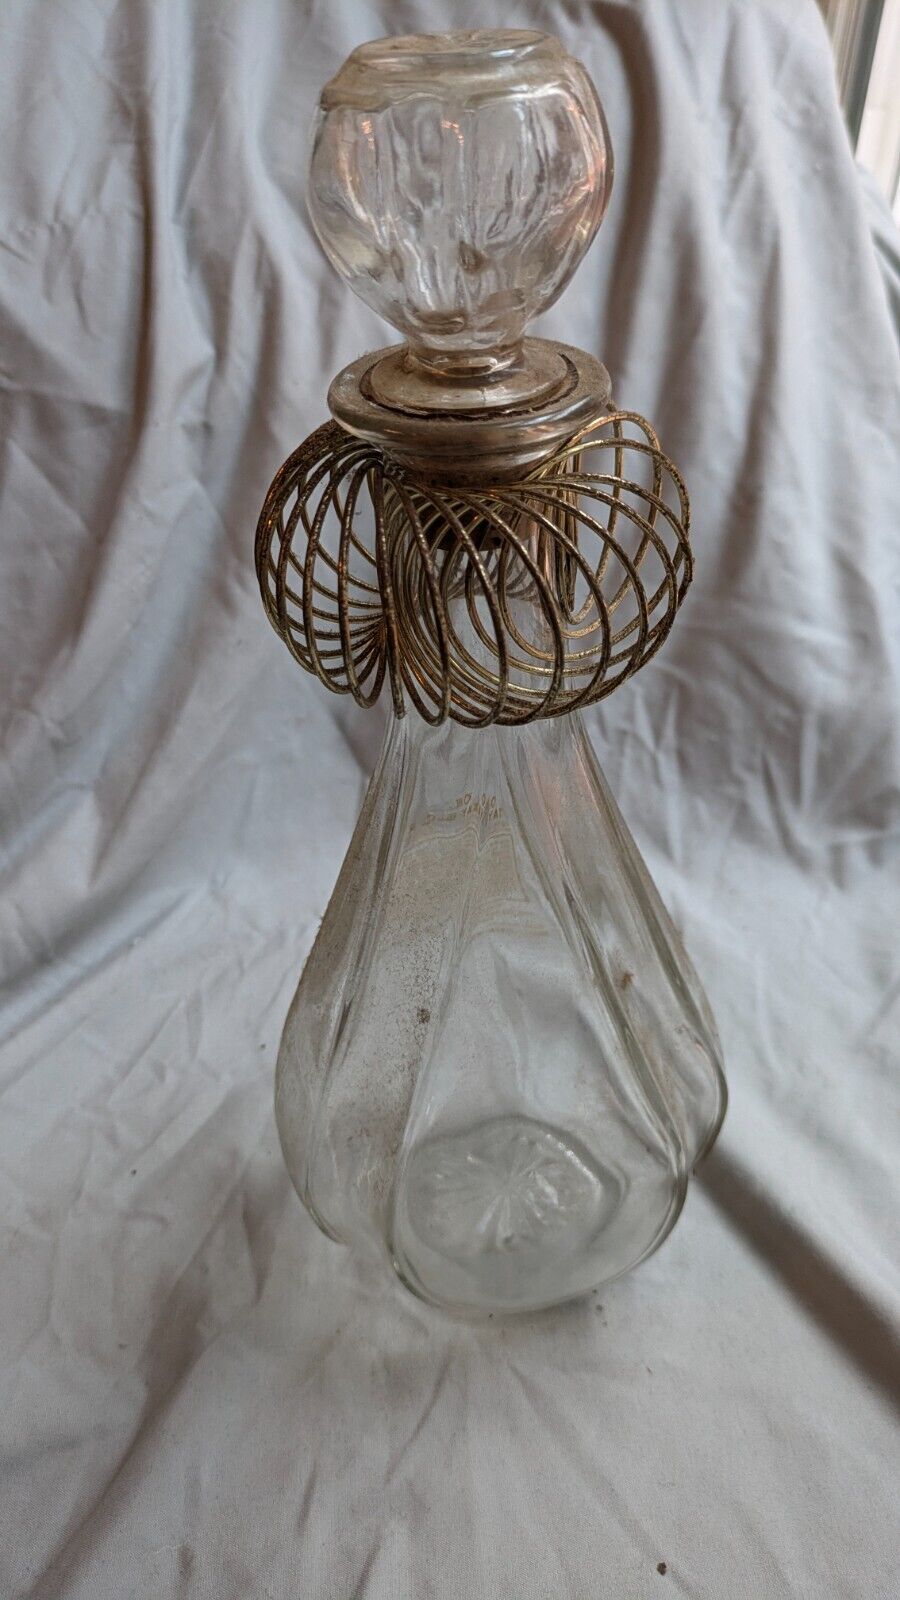 Vintage Old Taylor Genie-Style Glass Whiskey Bottle with matching glass stopper